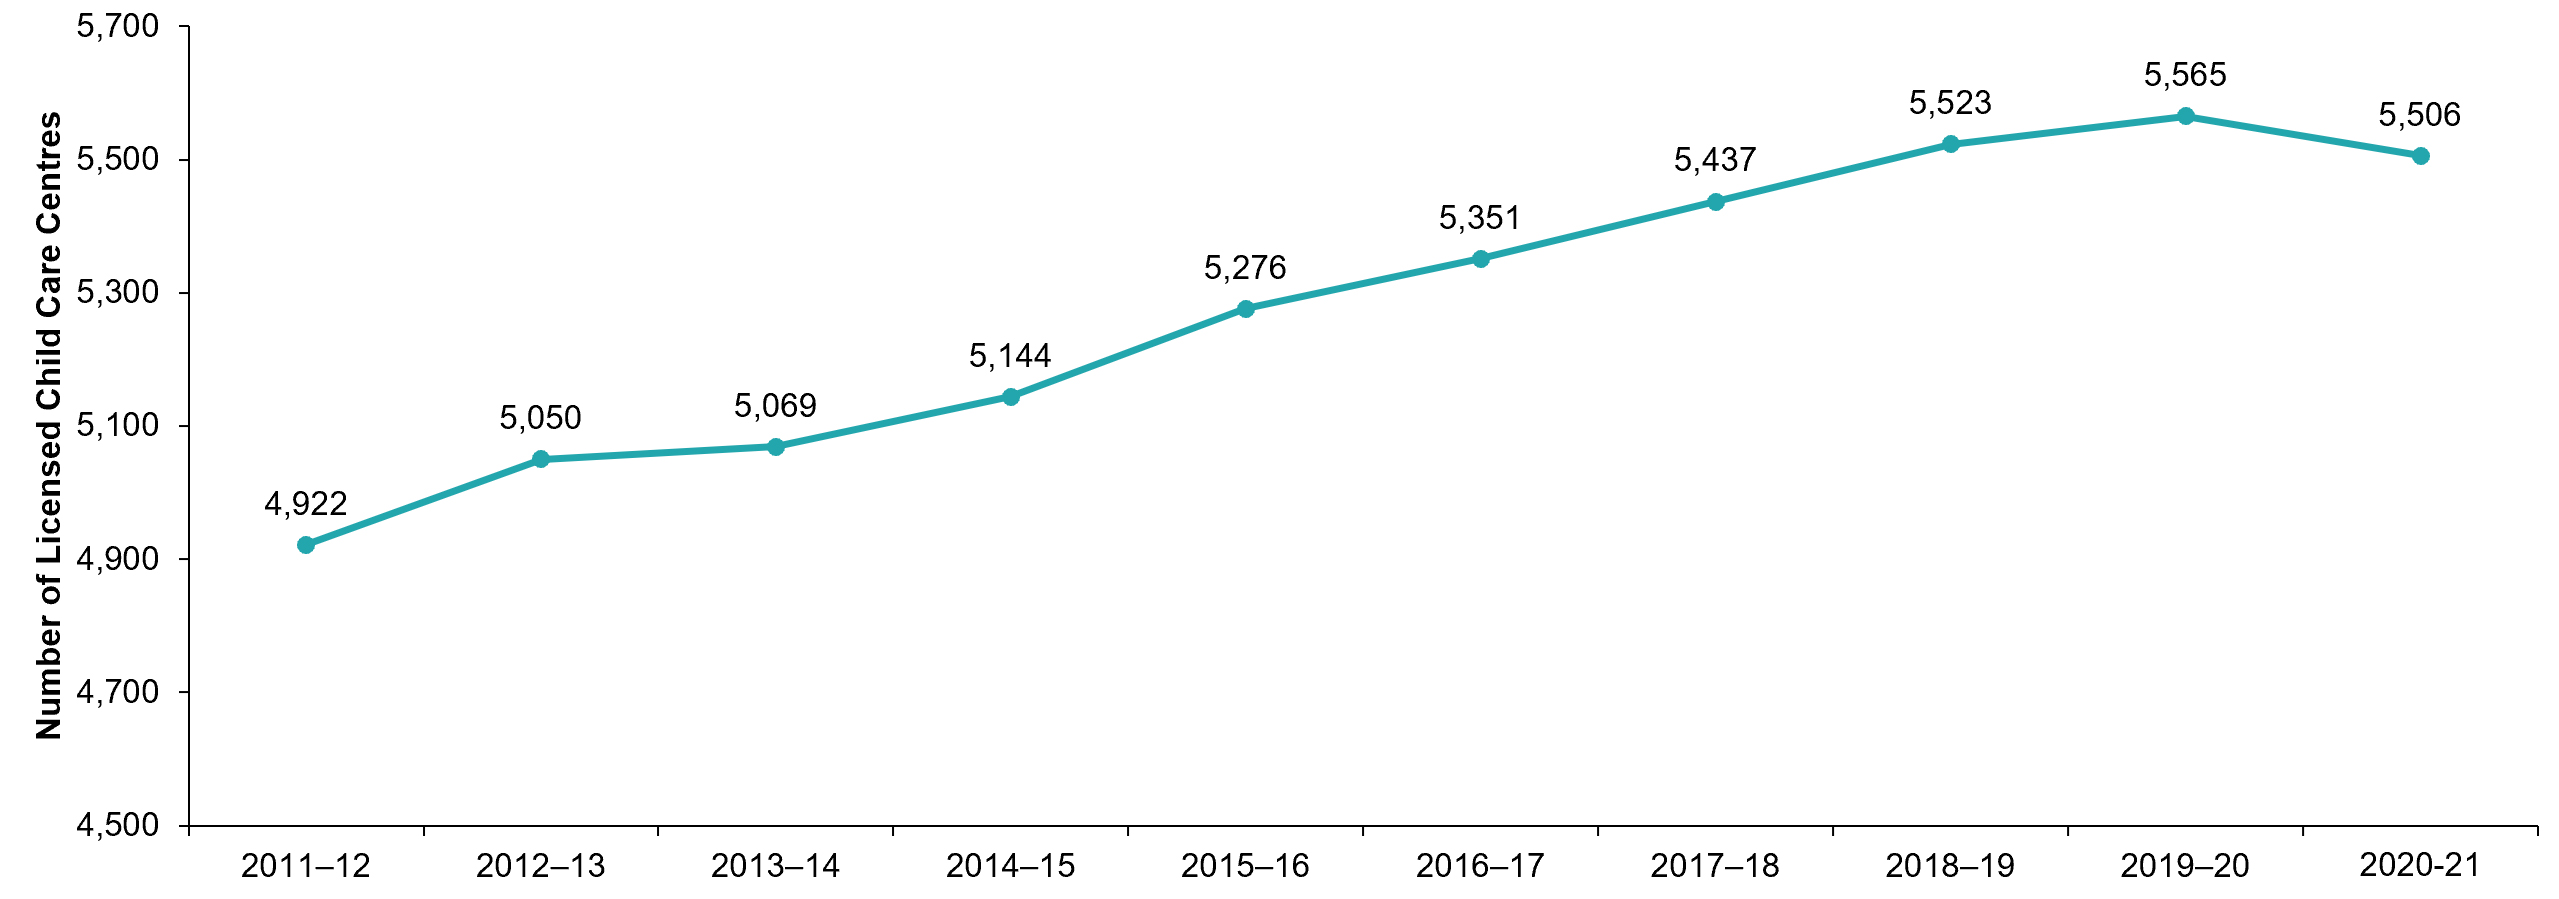 Figure 3: Number of Licensed Child Care Centres, 2011-12 to 2020-21